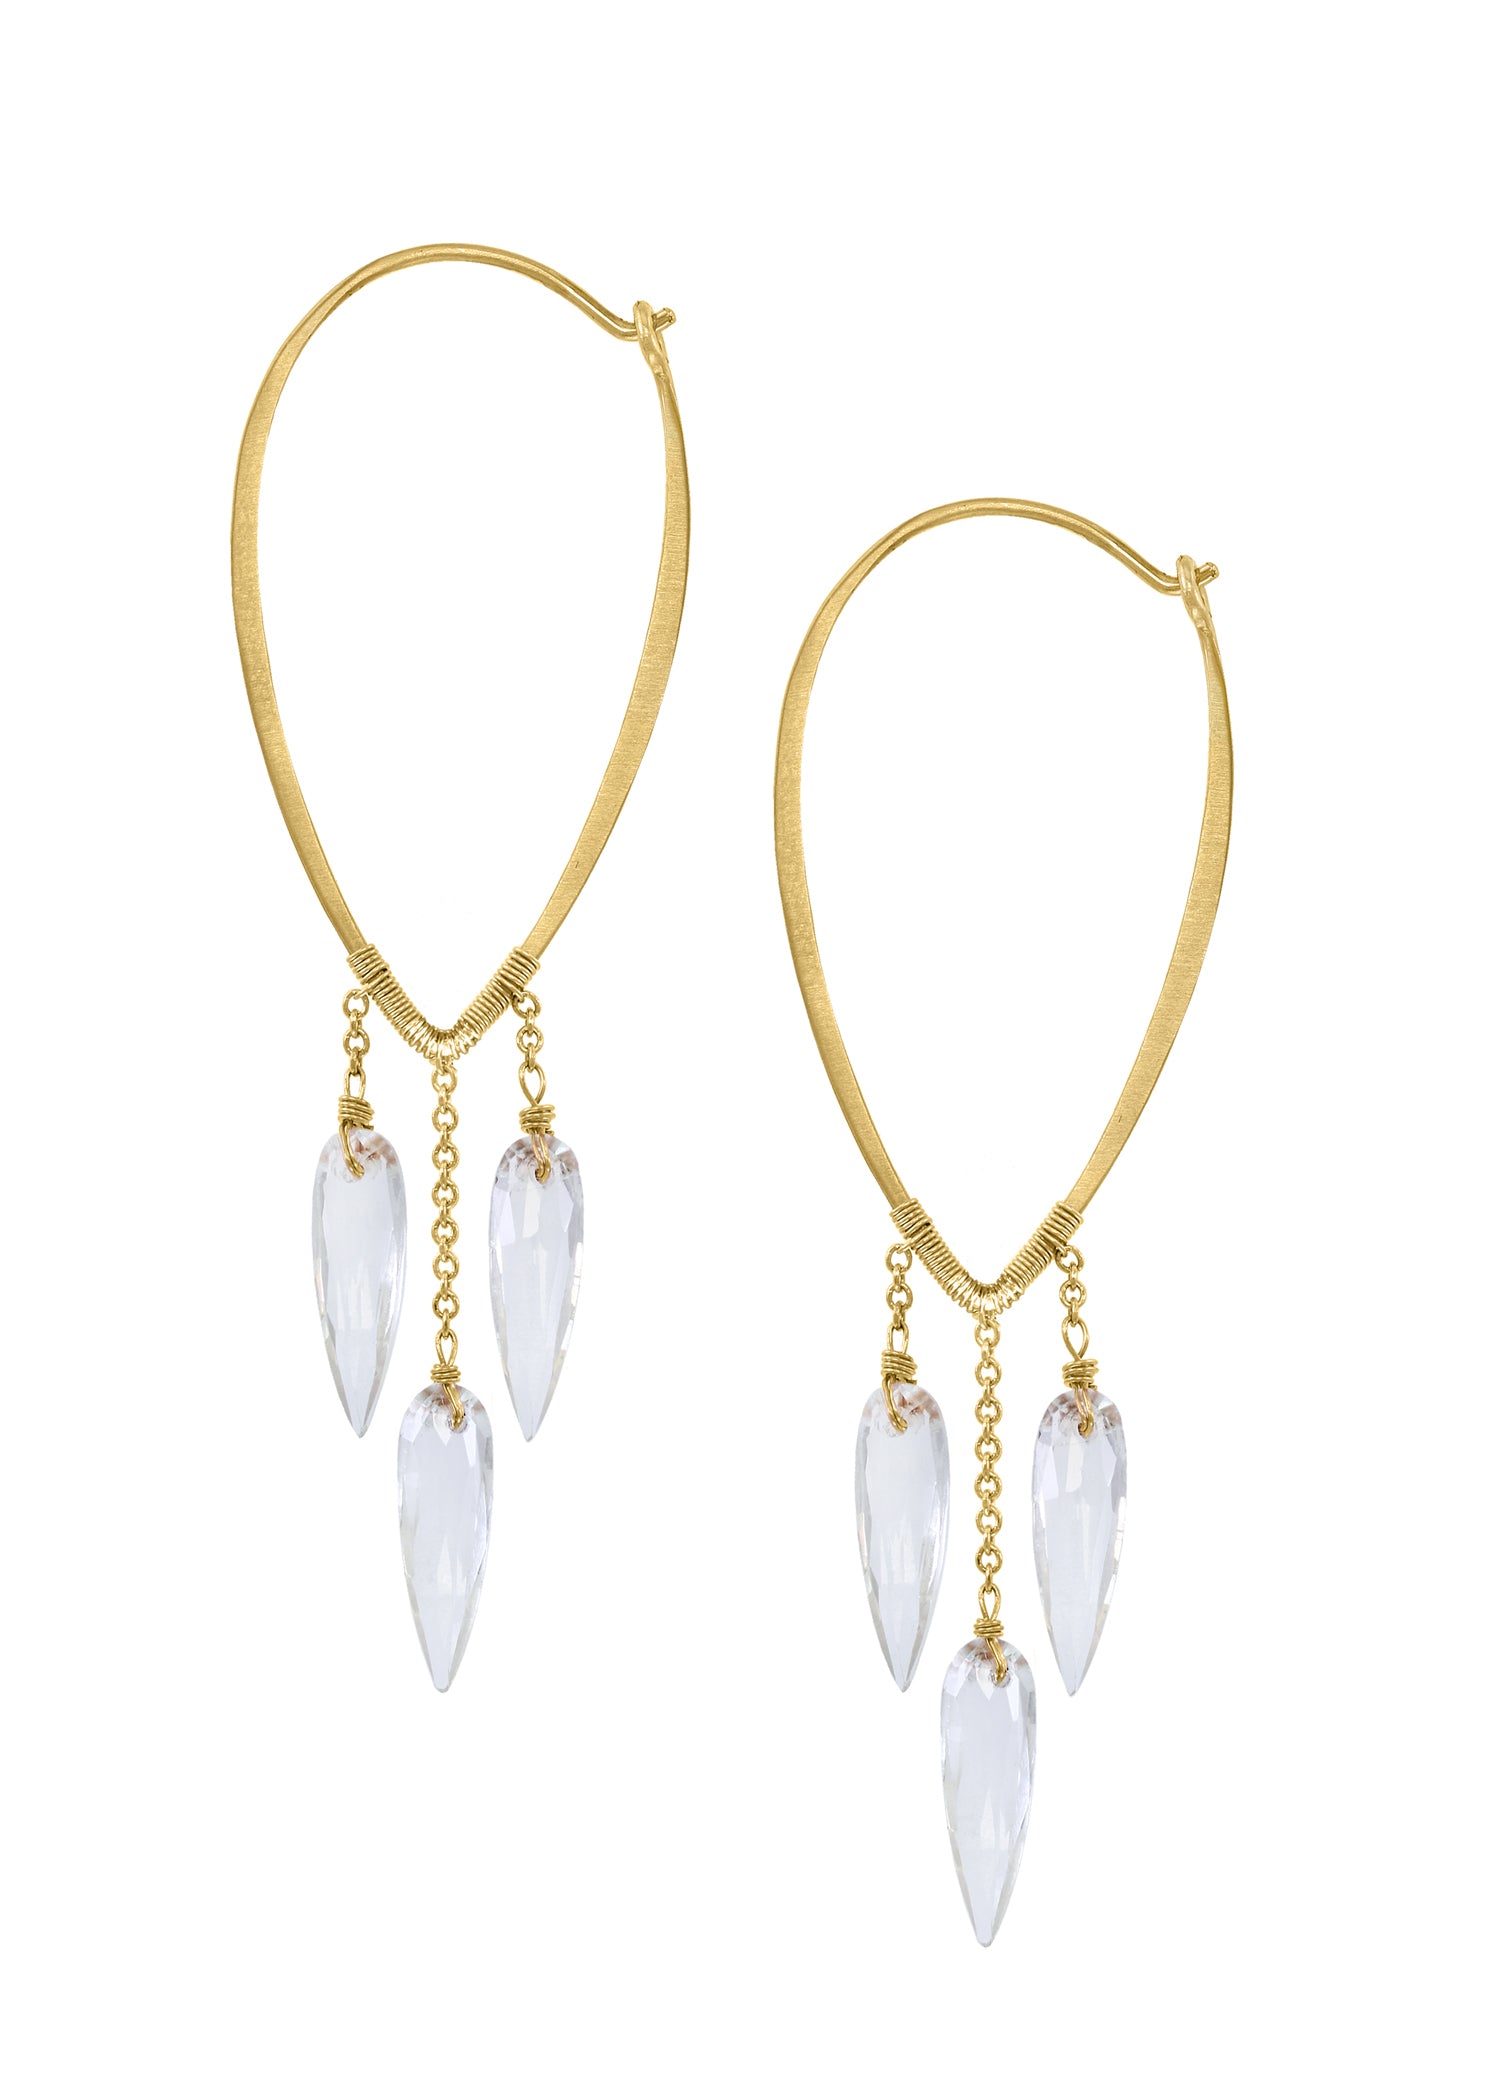 White topaz 14k gold Earrings measure 2-7/16" in length and 3/4" in width across the widest point of the hoop Handmade in our Los Angeles studio